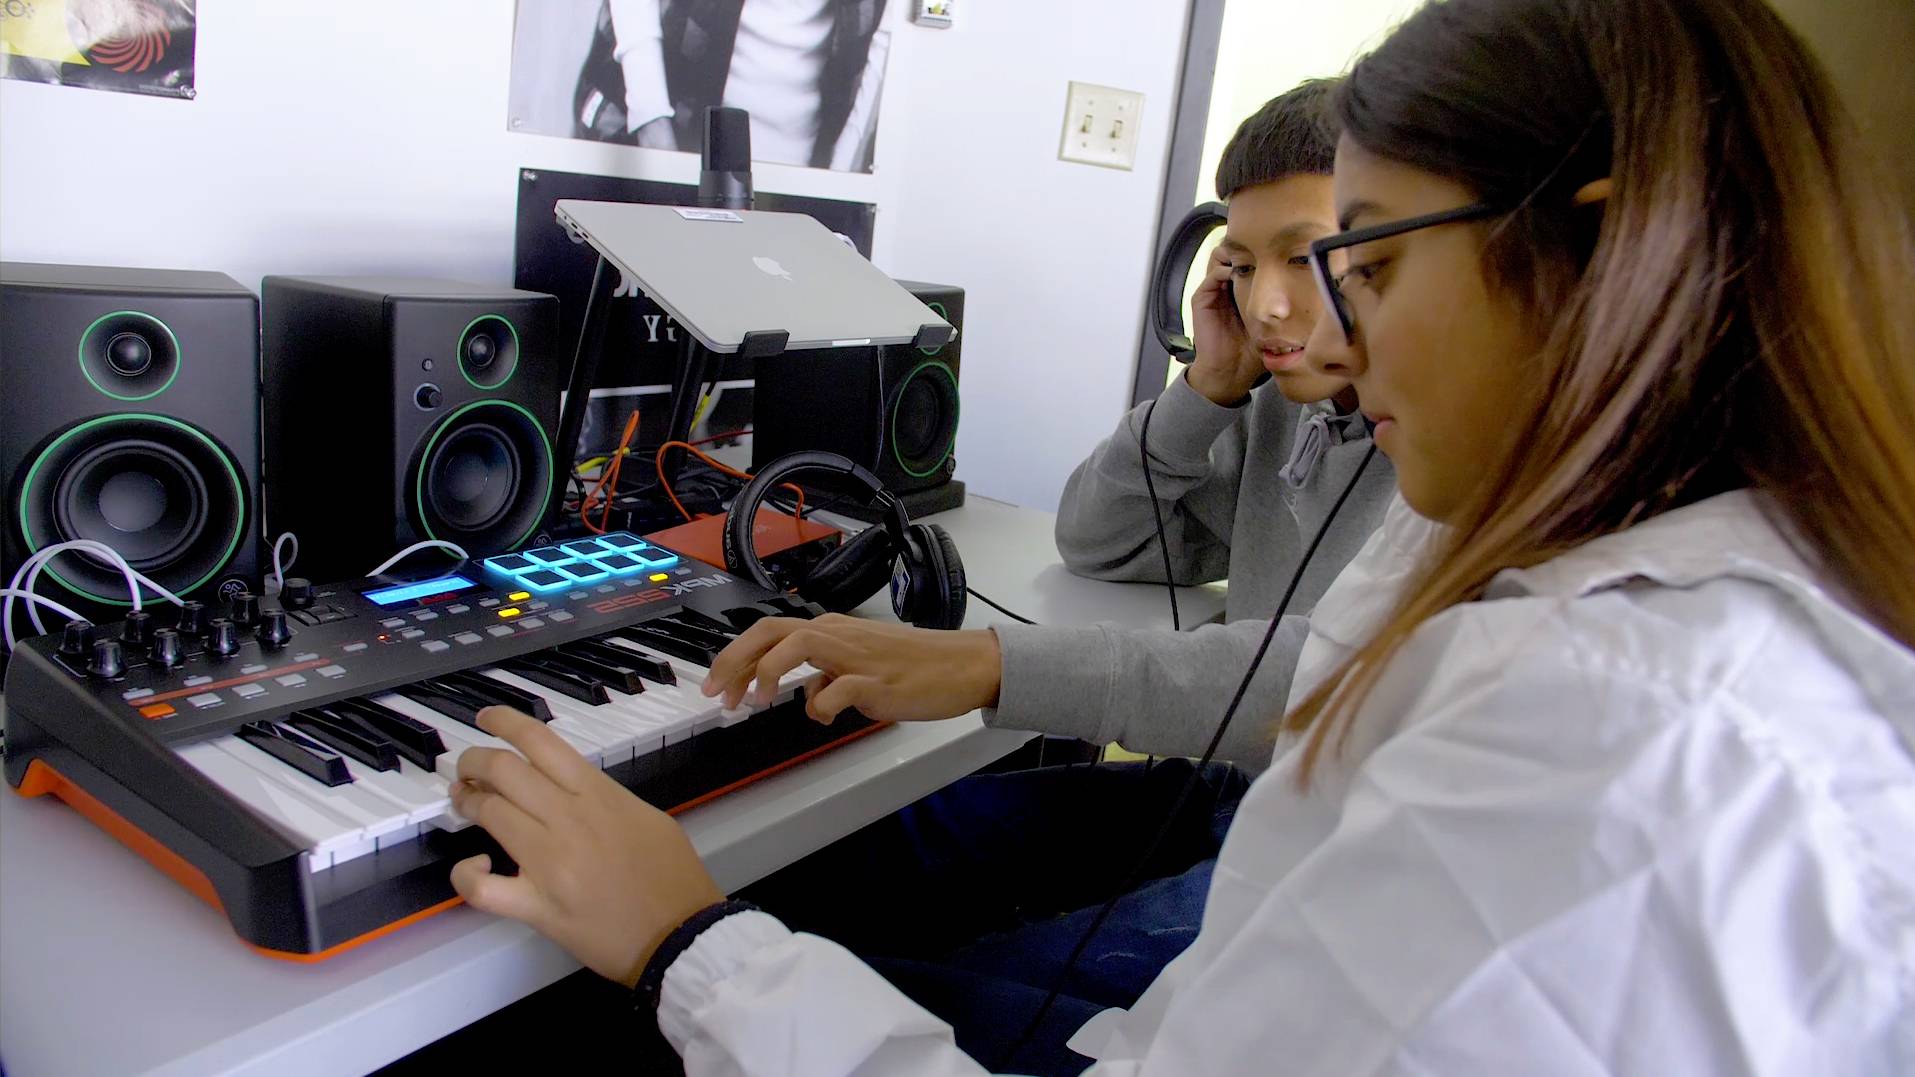 Students producing music at Sound Lab